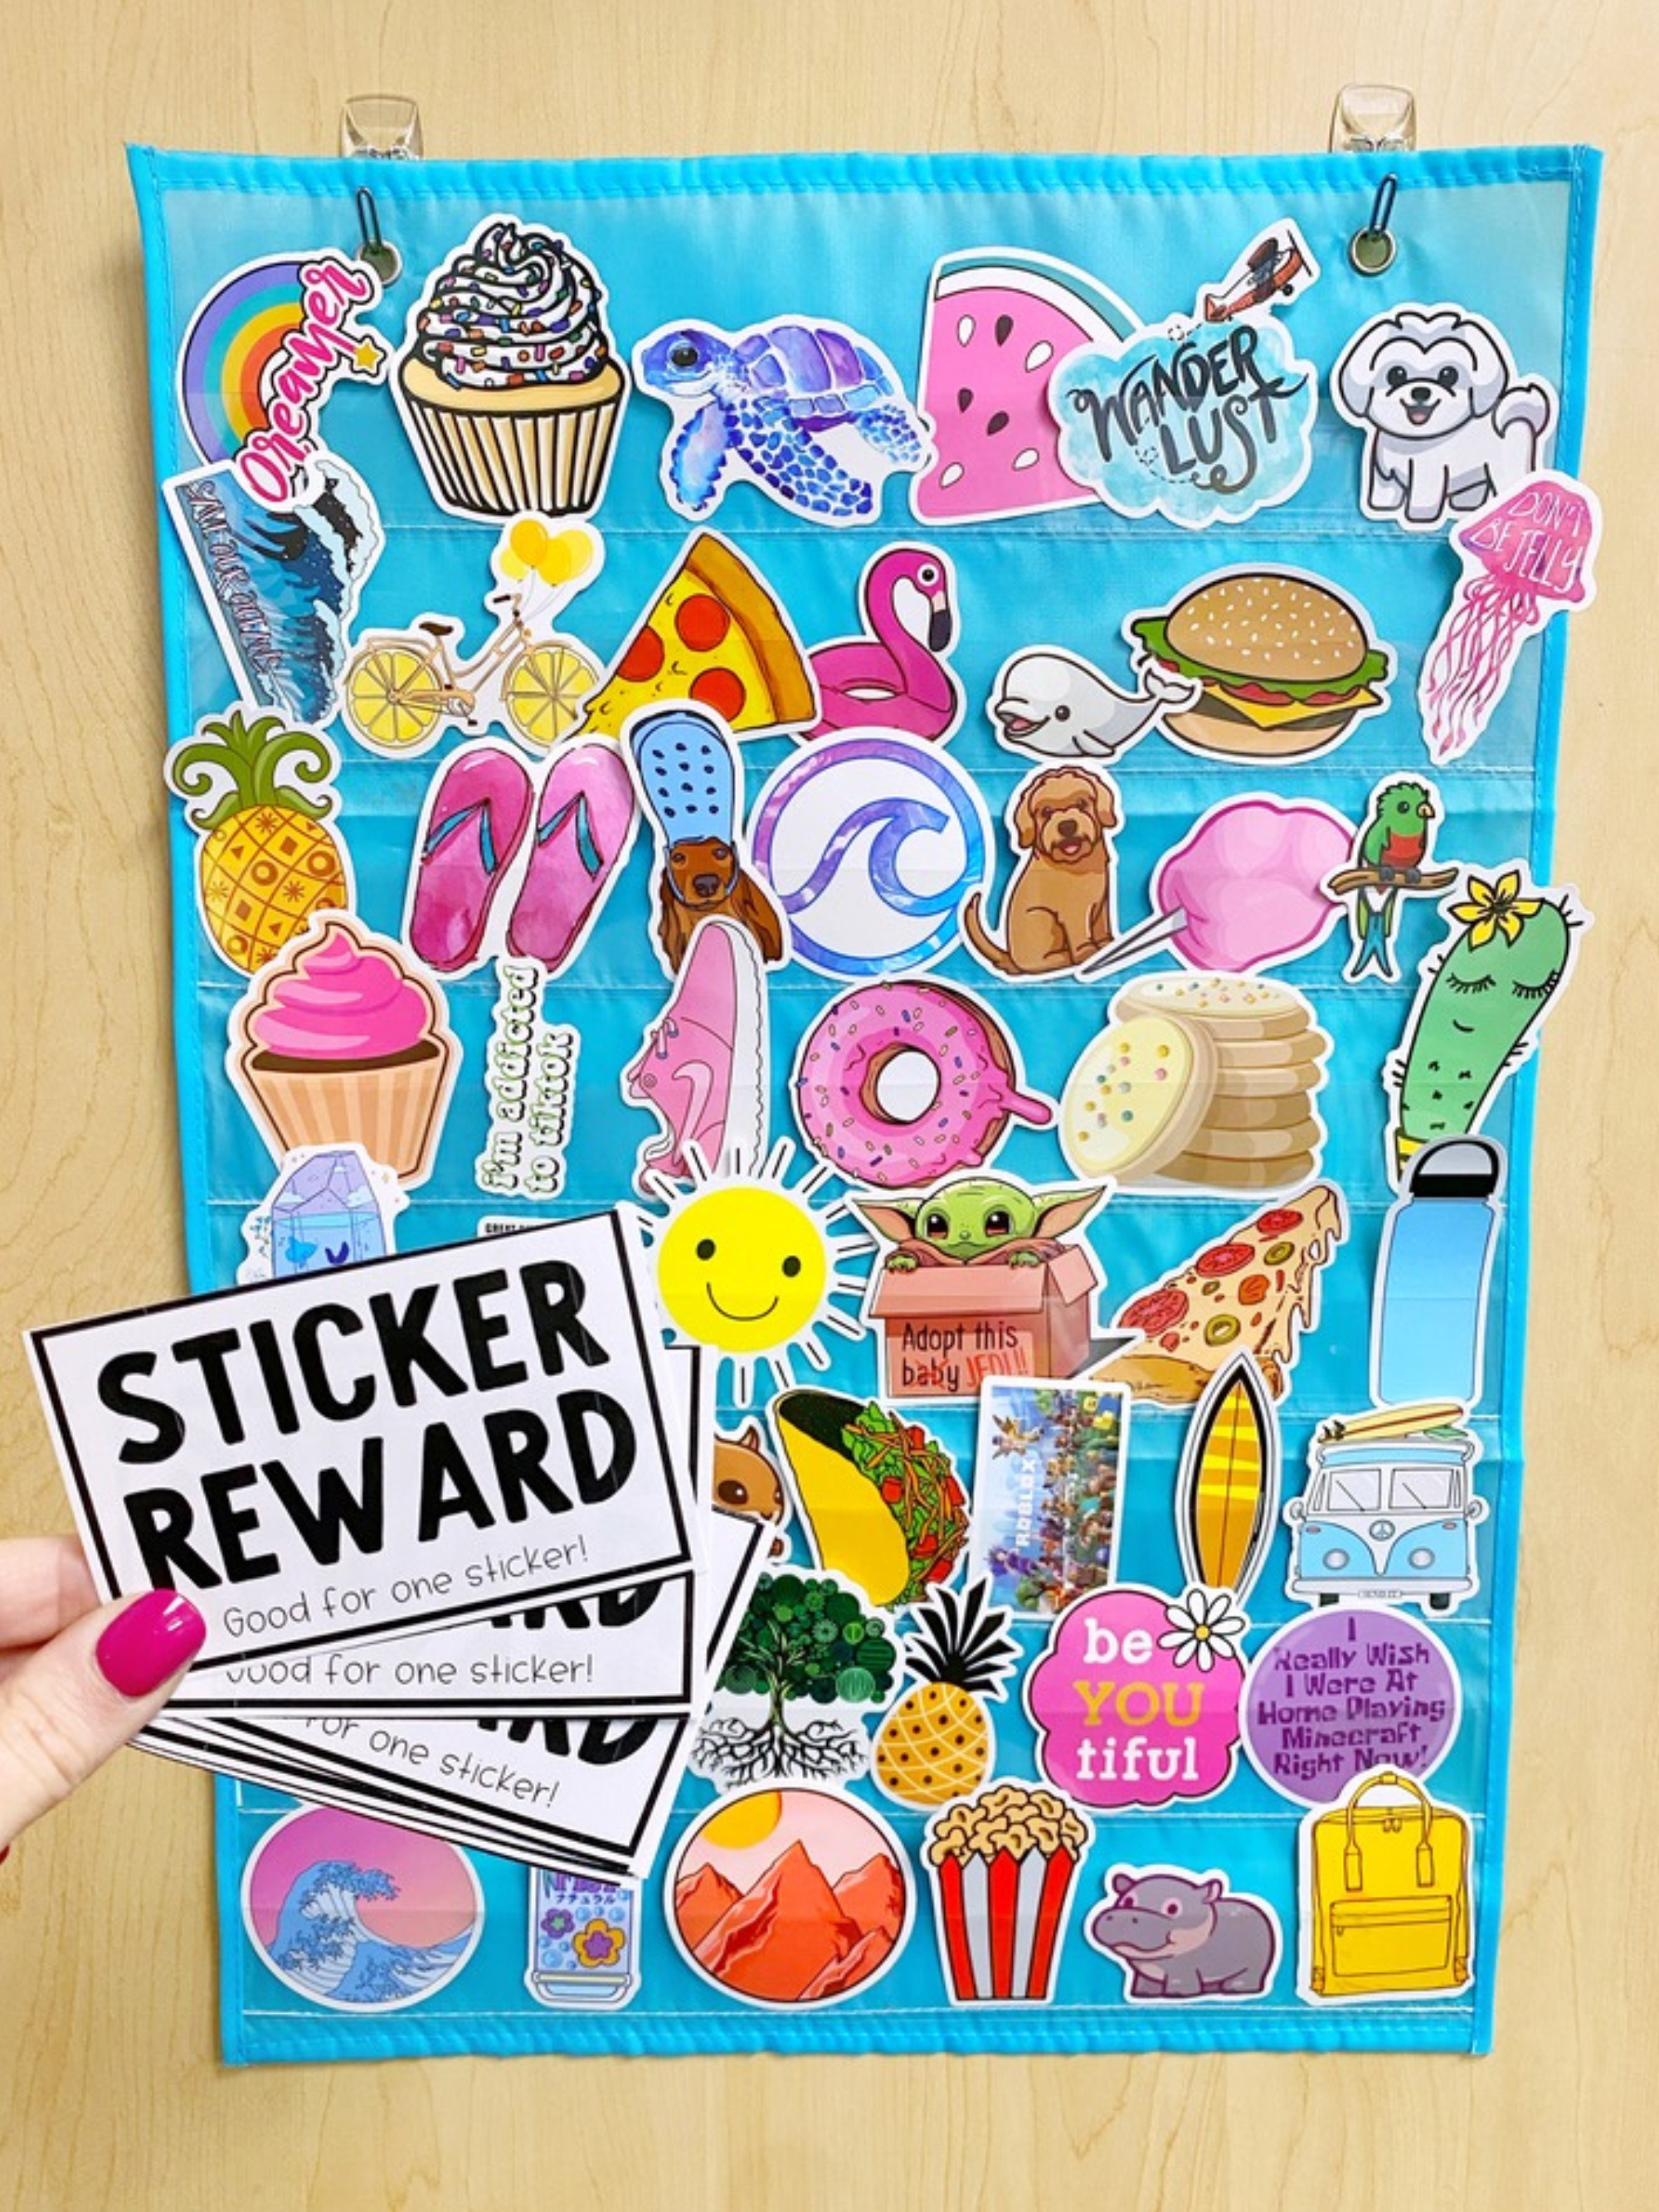 Sticker rewards that you can hand out to students who earn classroom stickers! Students can browse sticker display and then turn in the sticker reward when they are ready to redeem it for a sticker!